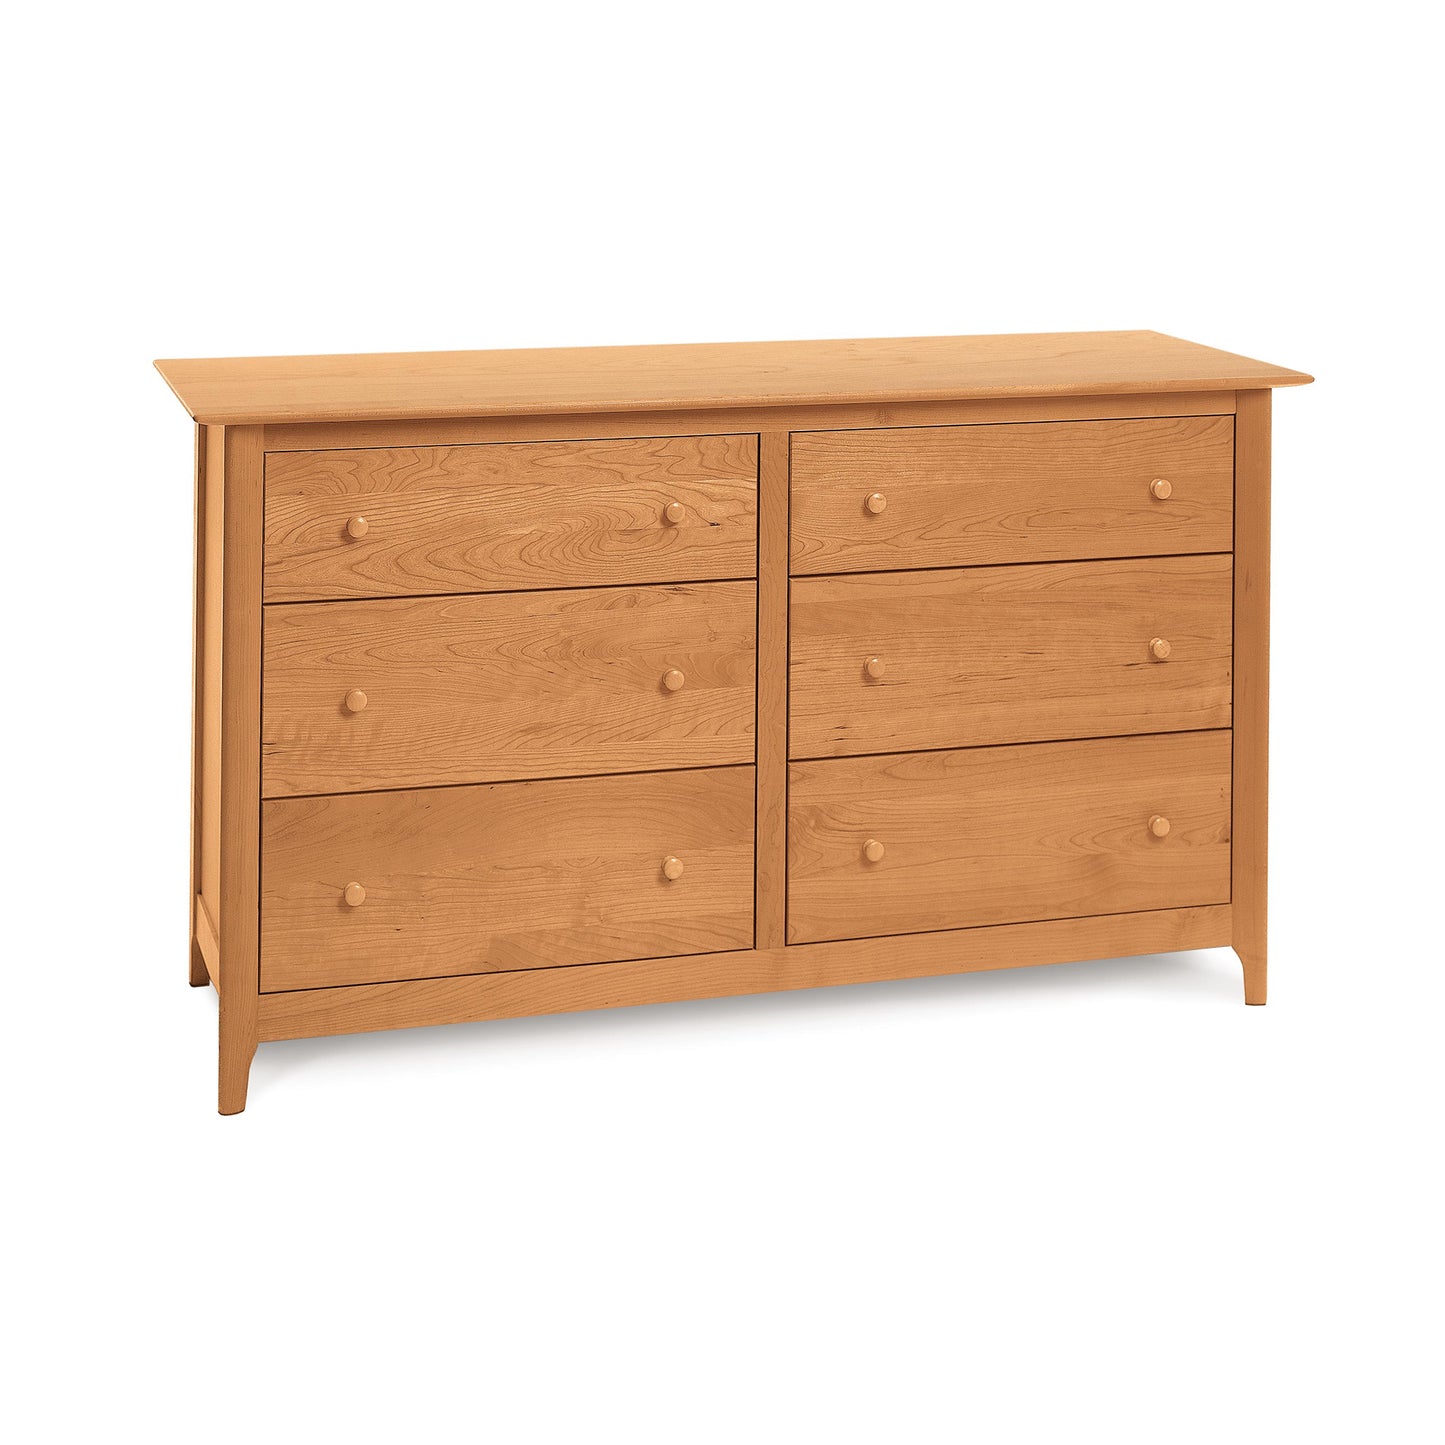 A luxury Sarah 6-Drawer Dresser with drawers designed in the American Shaker style, handmade and showcased on a crisp white background by Copeland Furniture.